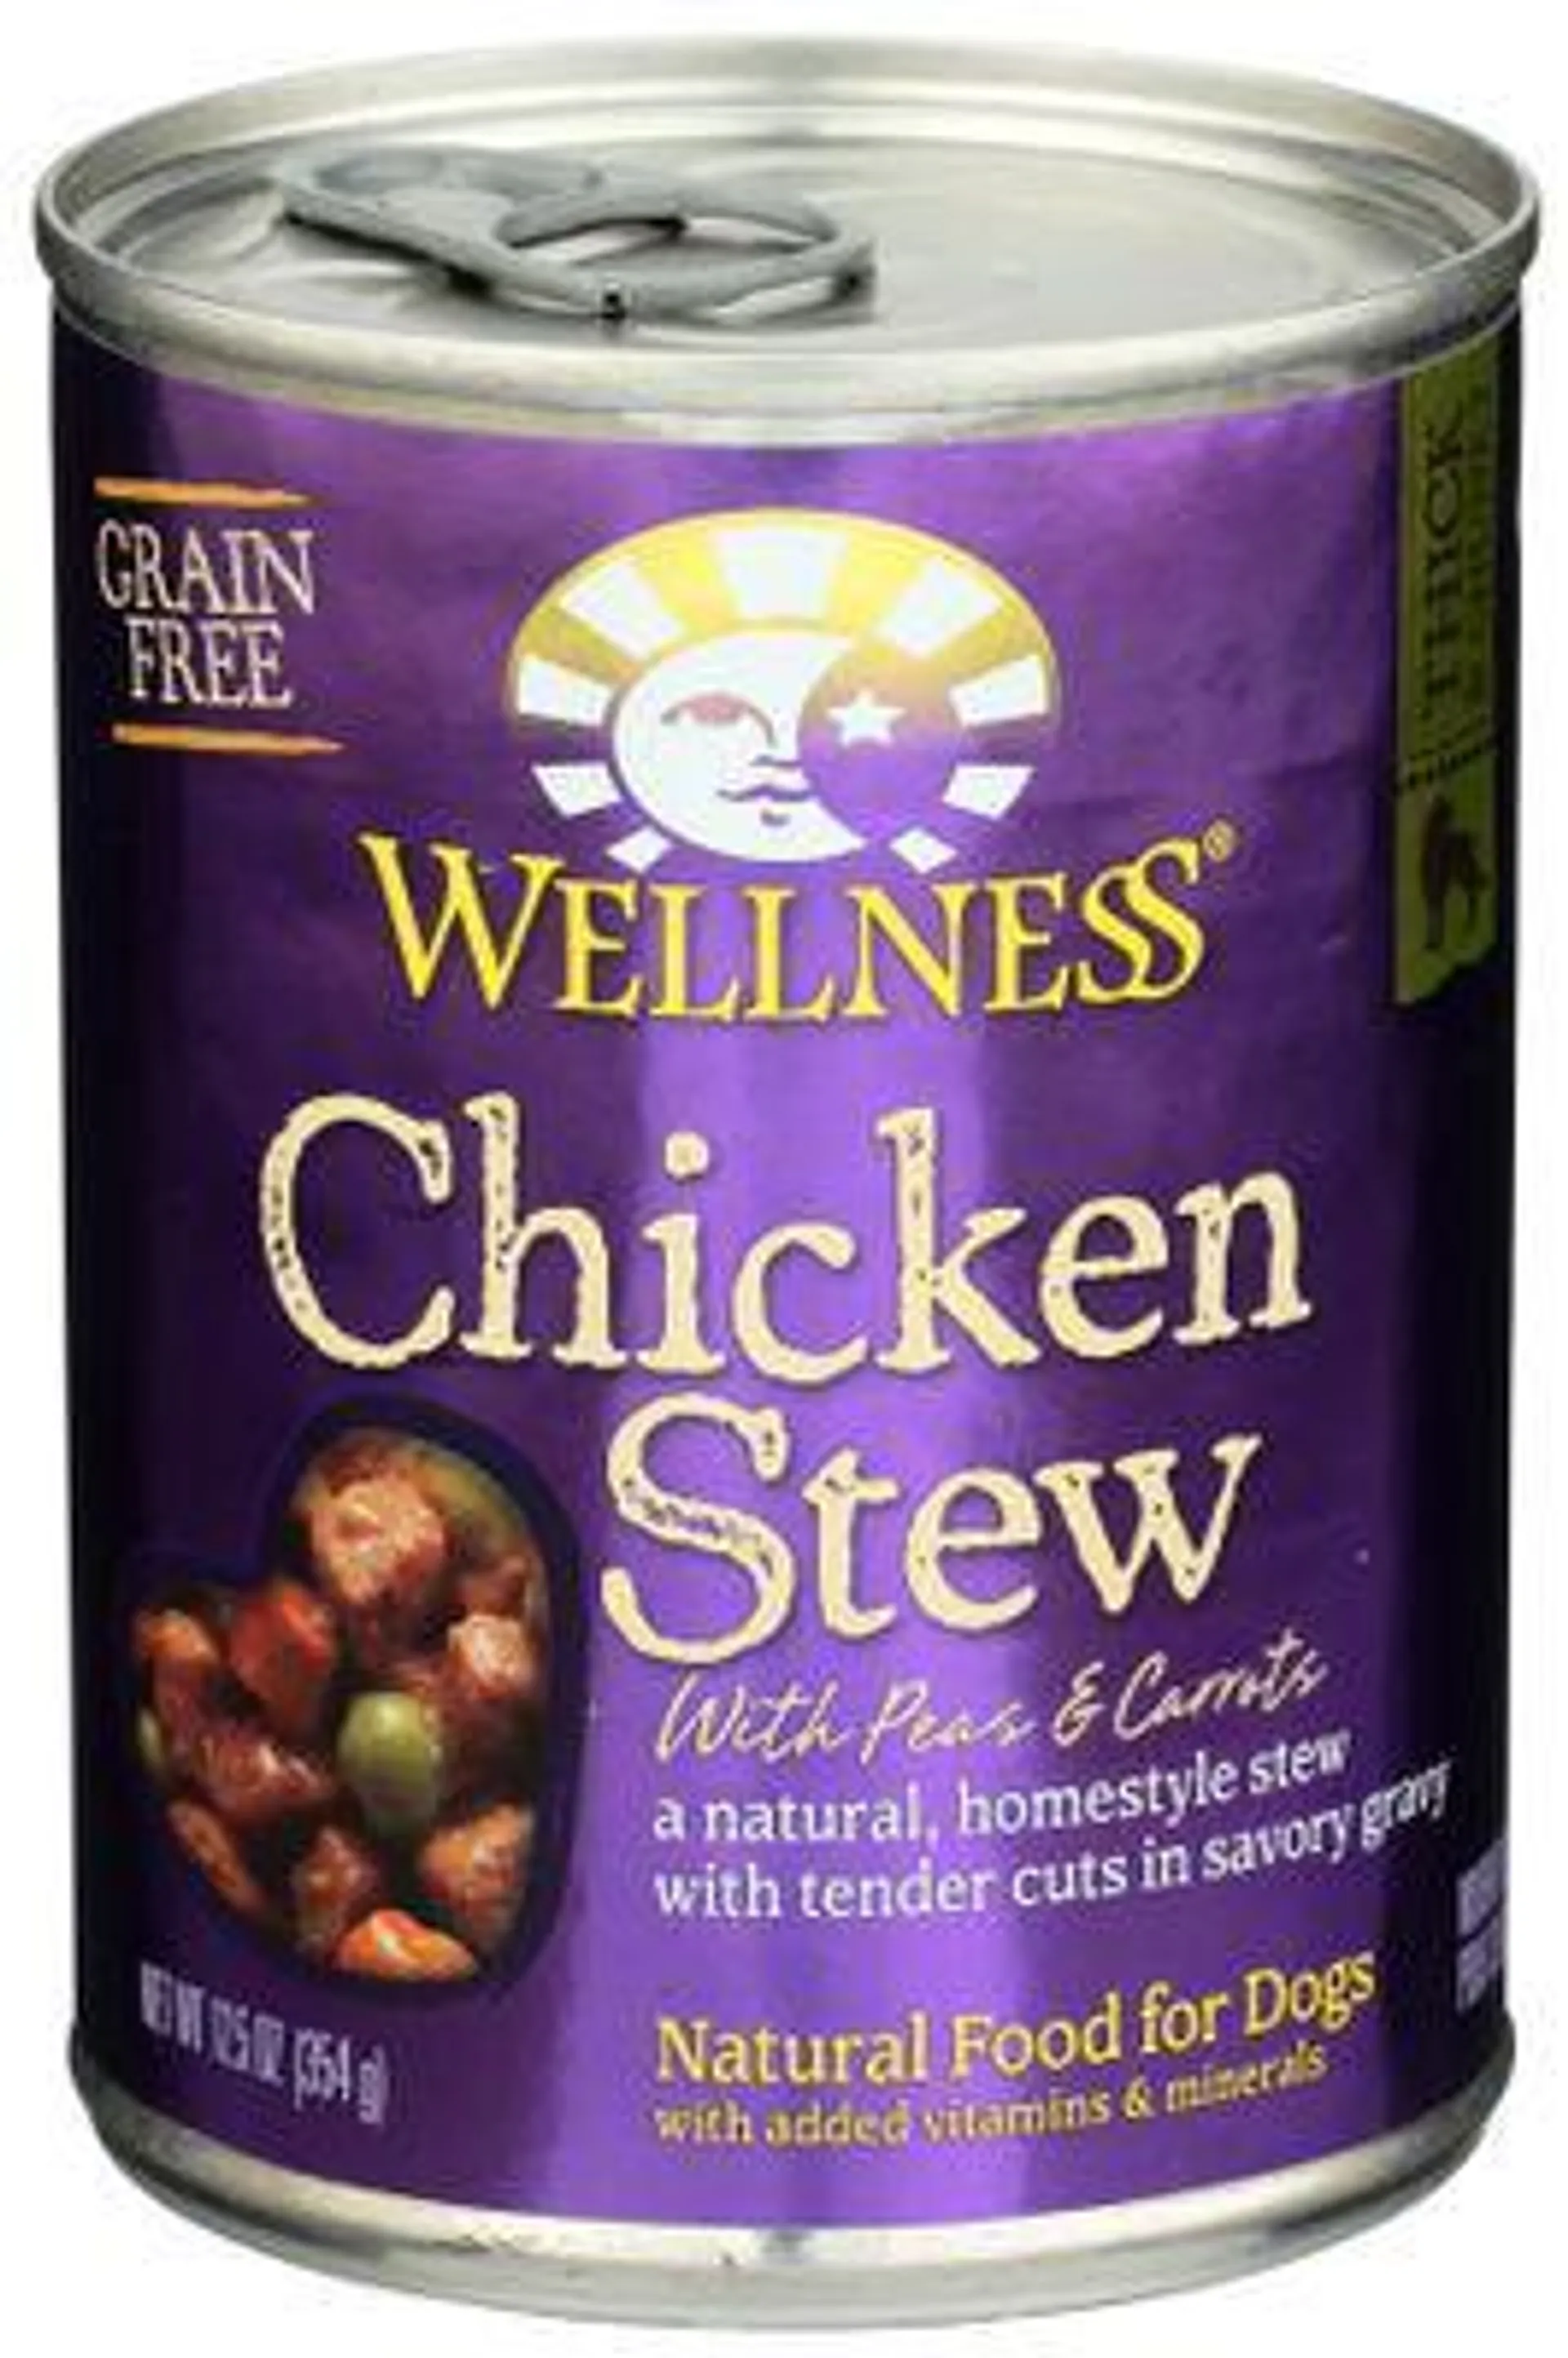 Wellness Chicken Stew with Peas & Carrots Canned Dog Food